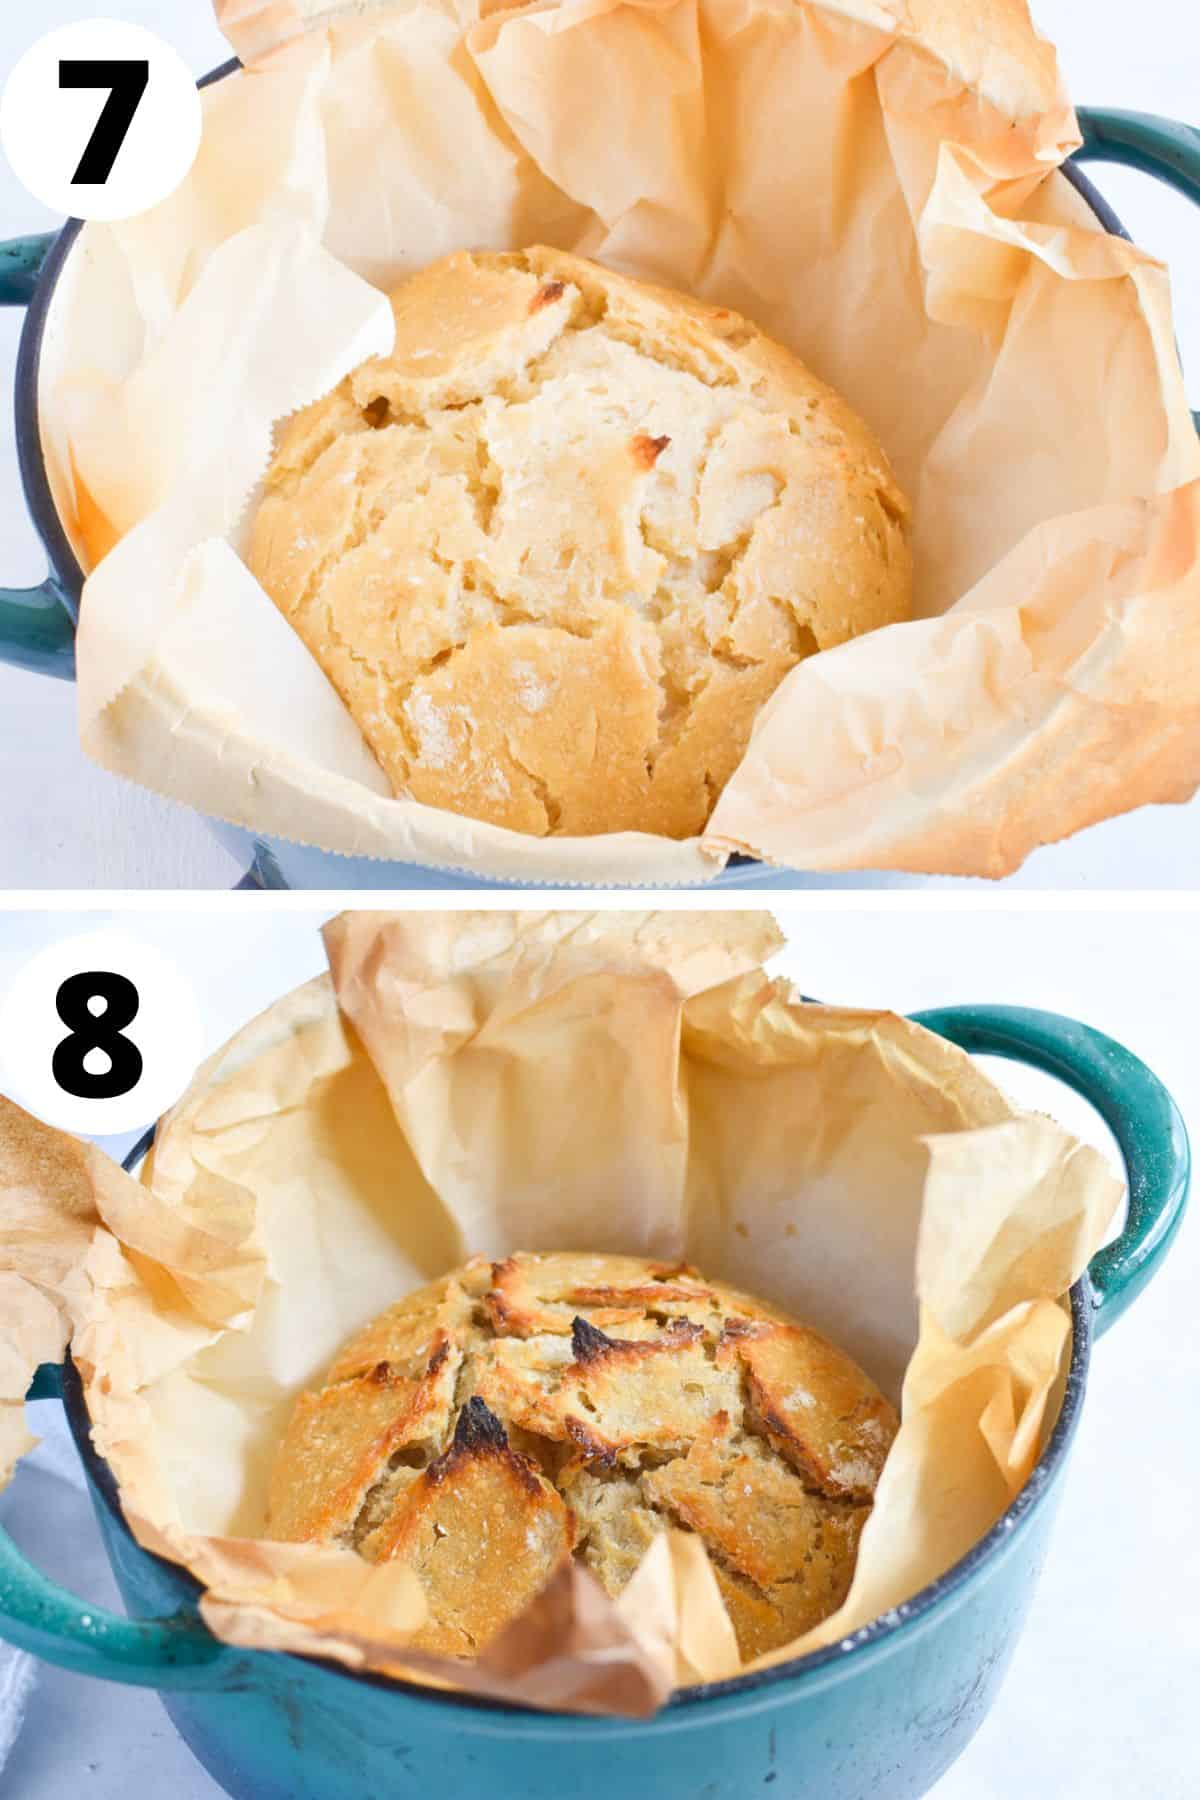 two images showing dough partially baked and fully baked. 